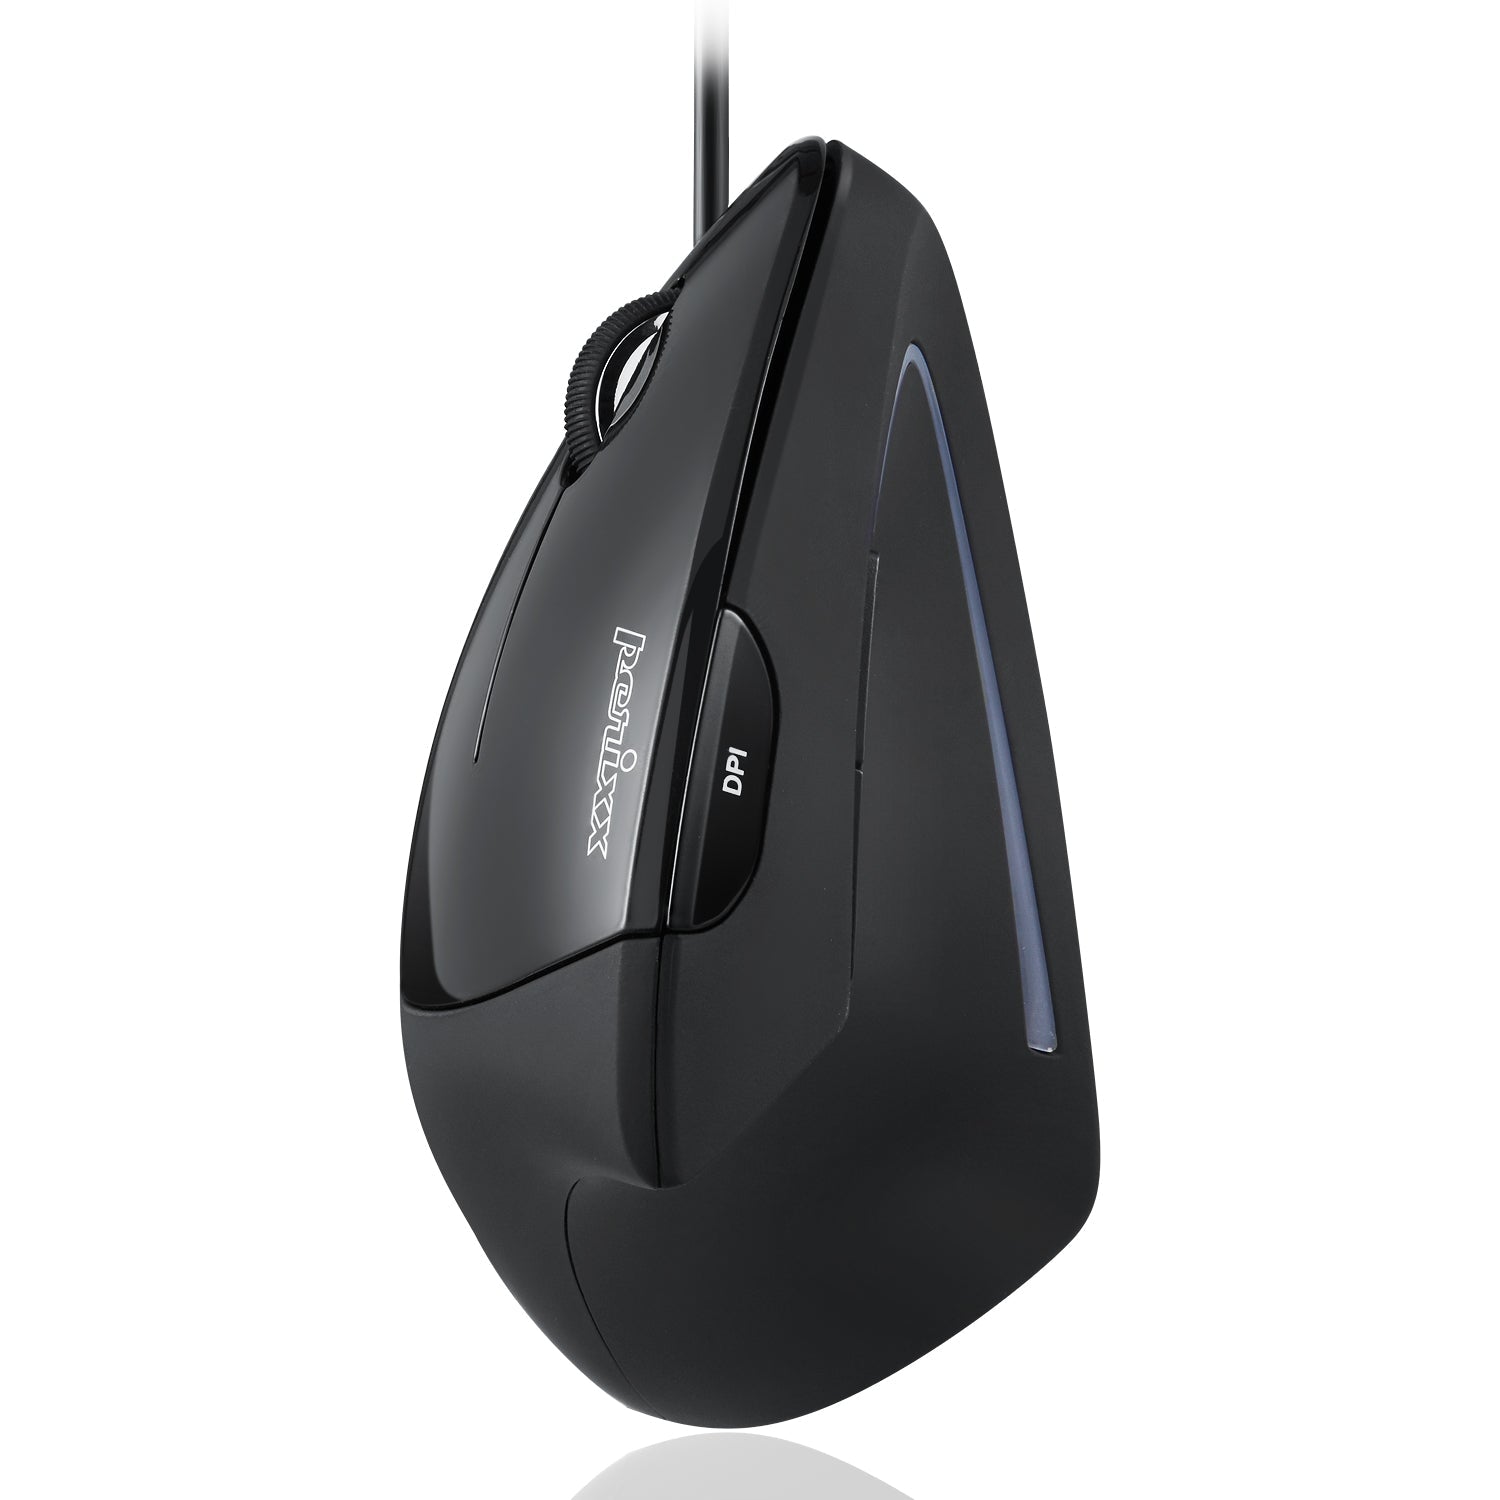 PERIMICE-513 L - Wired Left-Handed Ergonomic Vertical Mouse - Perixx Europe